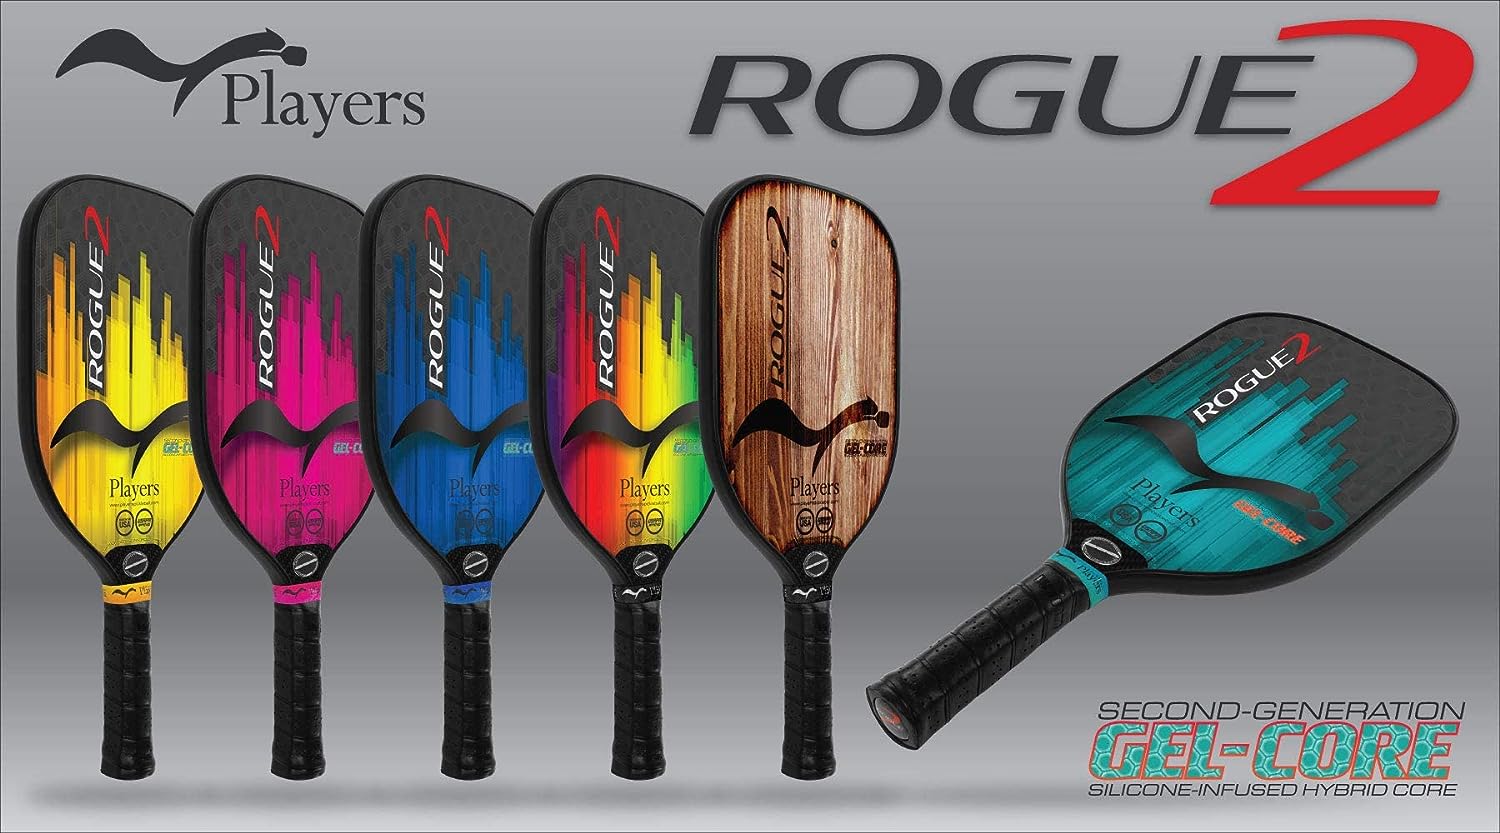 Rogue2 Gel-Core Pickleball Paddle Made in The USA